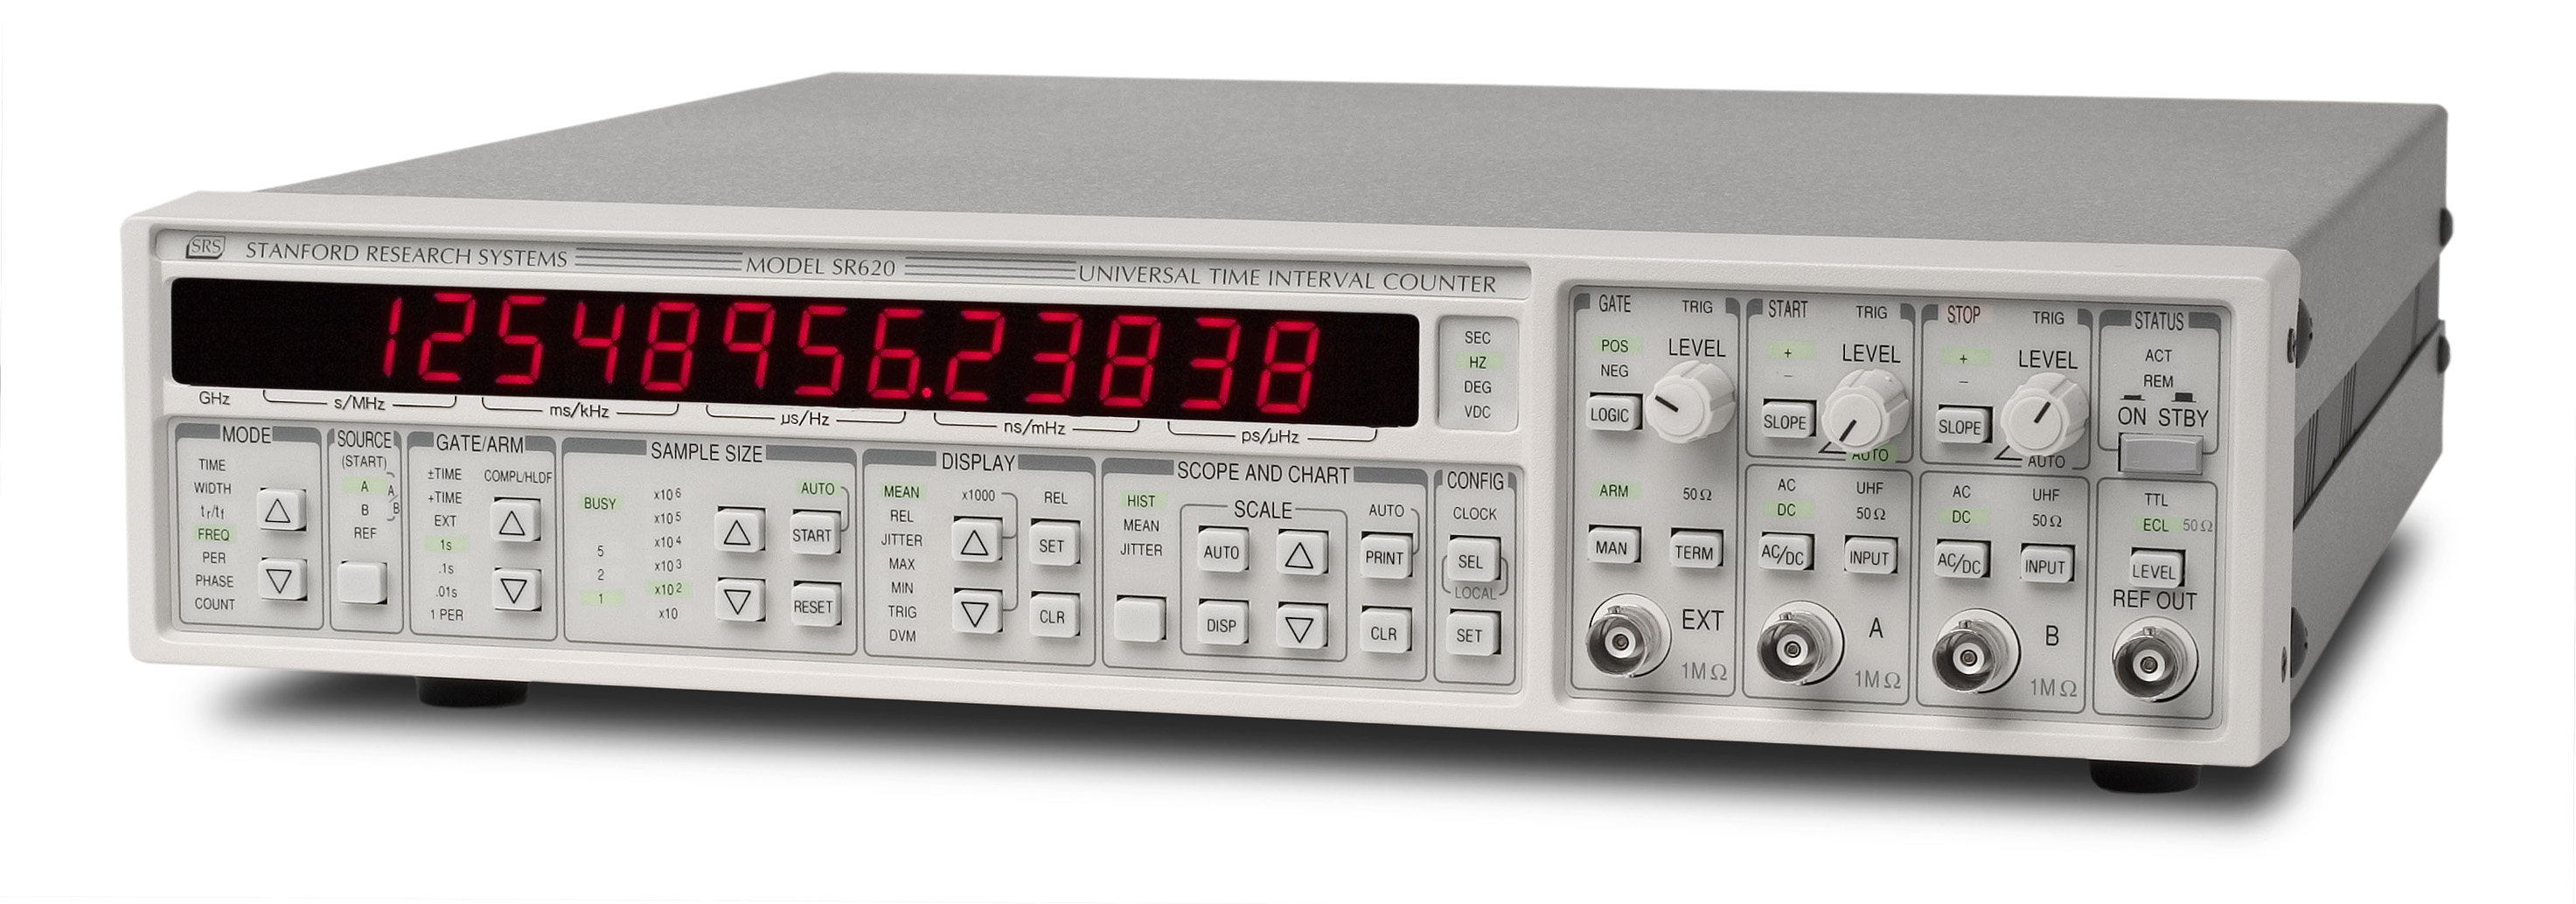 SR620 - Stanford Research Frequency Counter - Click Image to Close